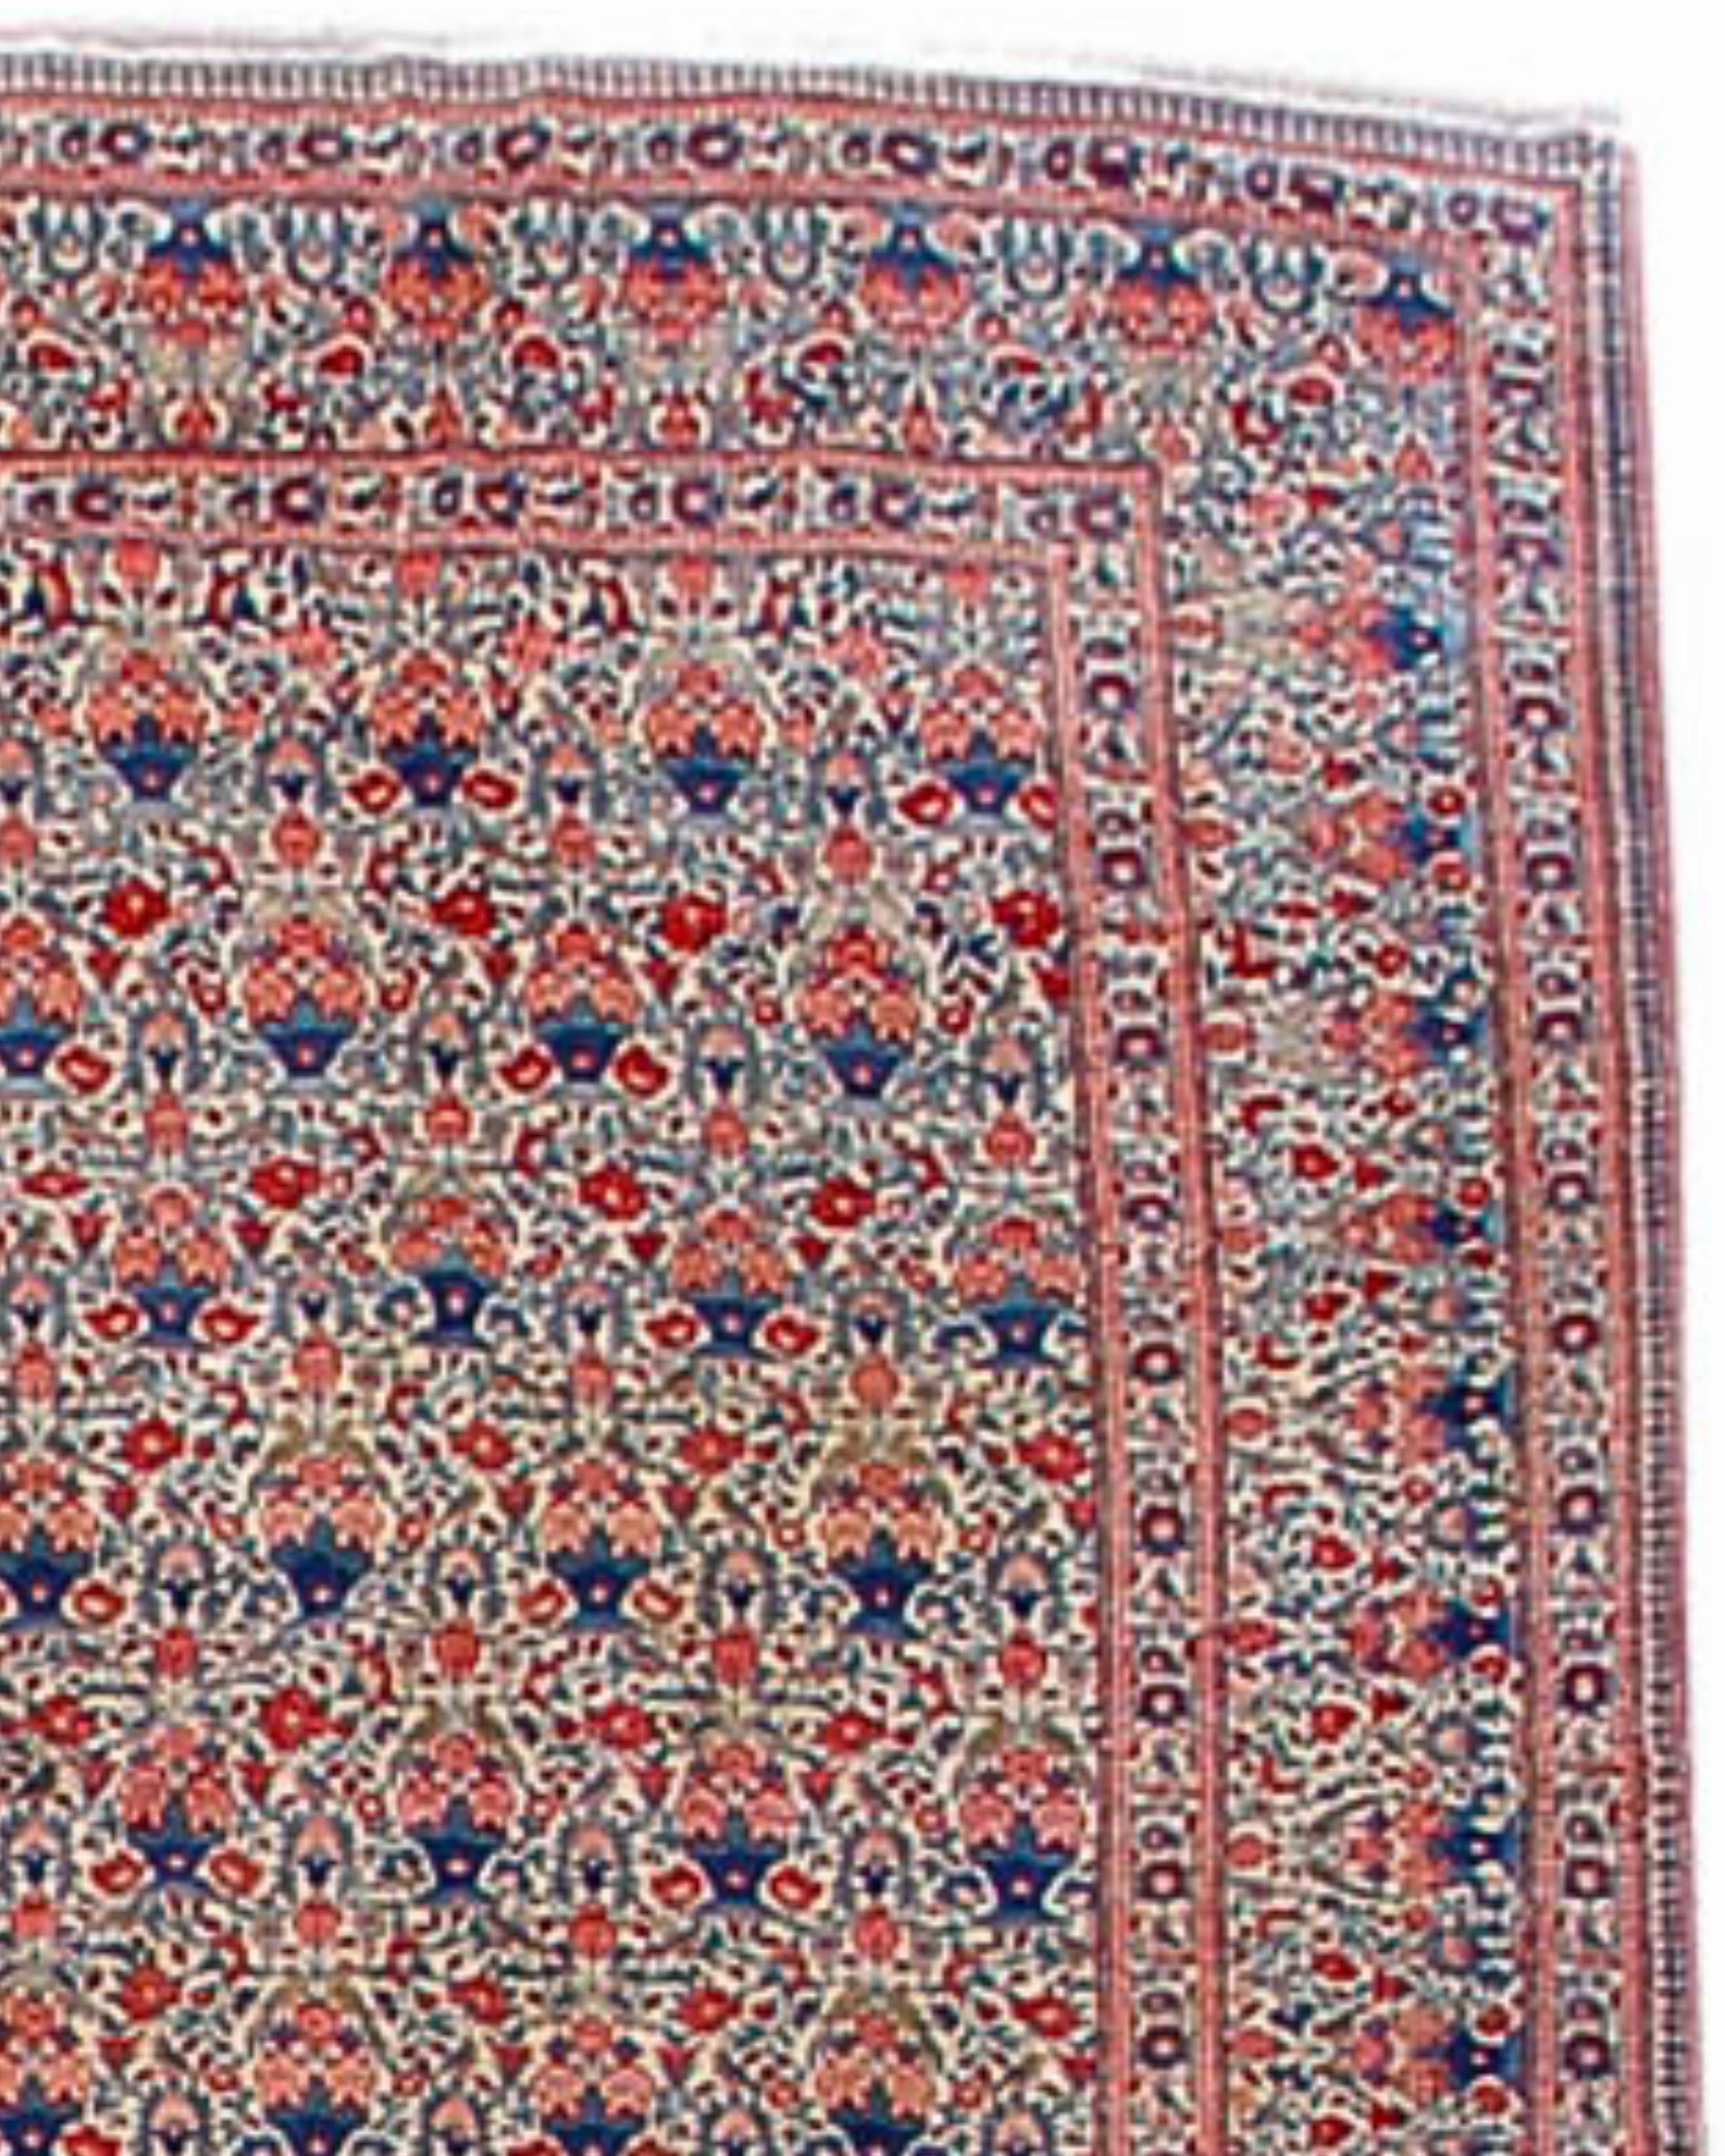 Antique Persian Tehran Rug, Early 20th Century

This elegant carpet was woven in the vicinity of the Persian capital city of Tehran. Both the ivory field and borders are filled with clusters of potted flowering roses, a flower that has a special